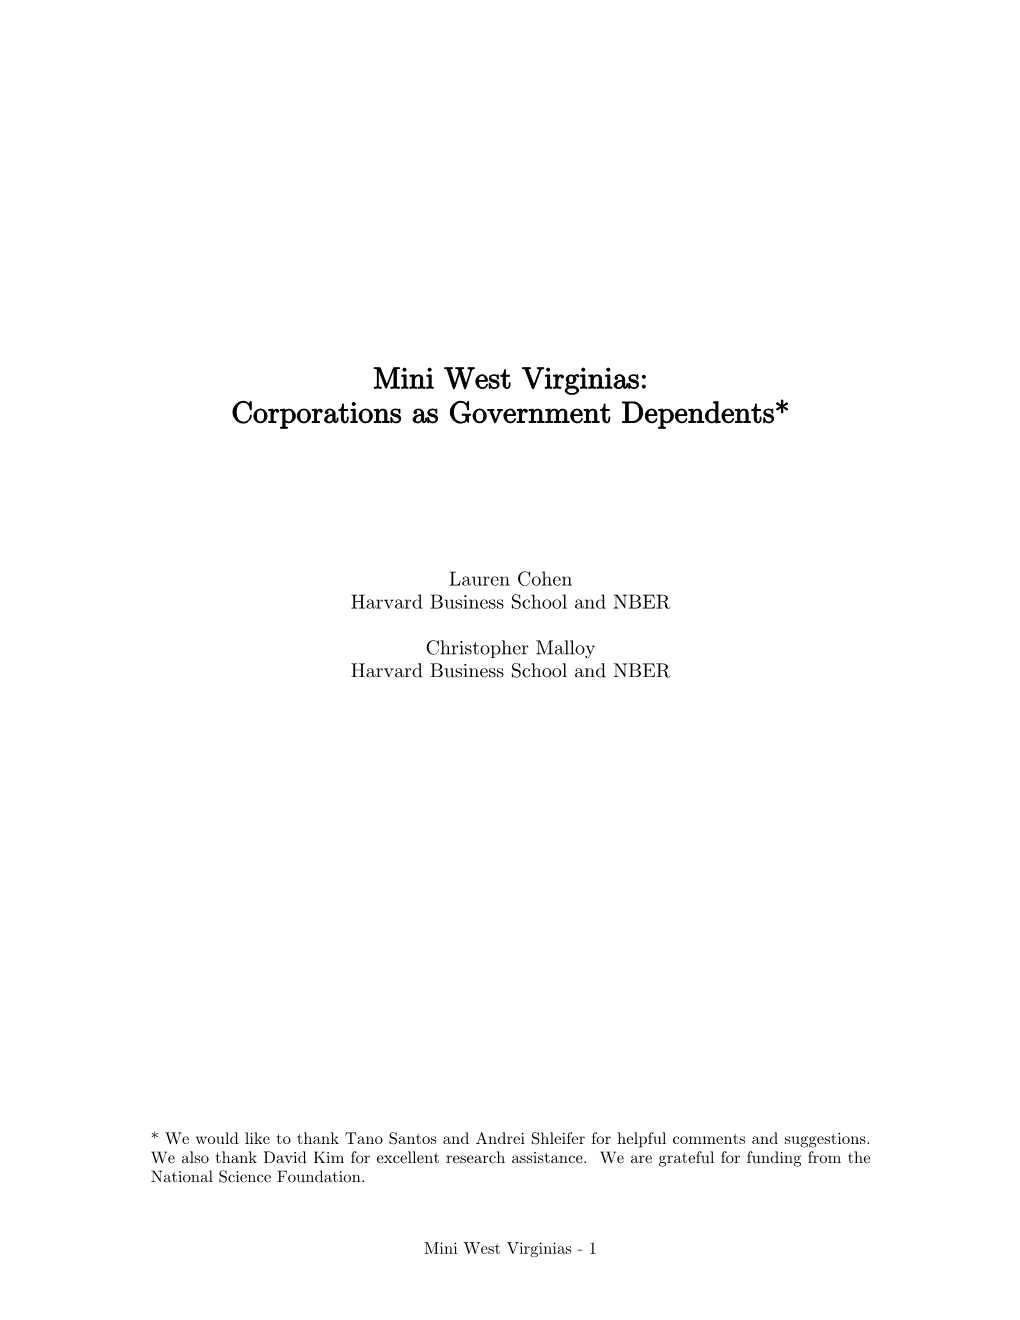 Mini West Virginias: Corporations As Government Dependents*